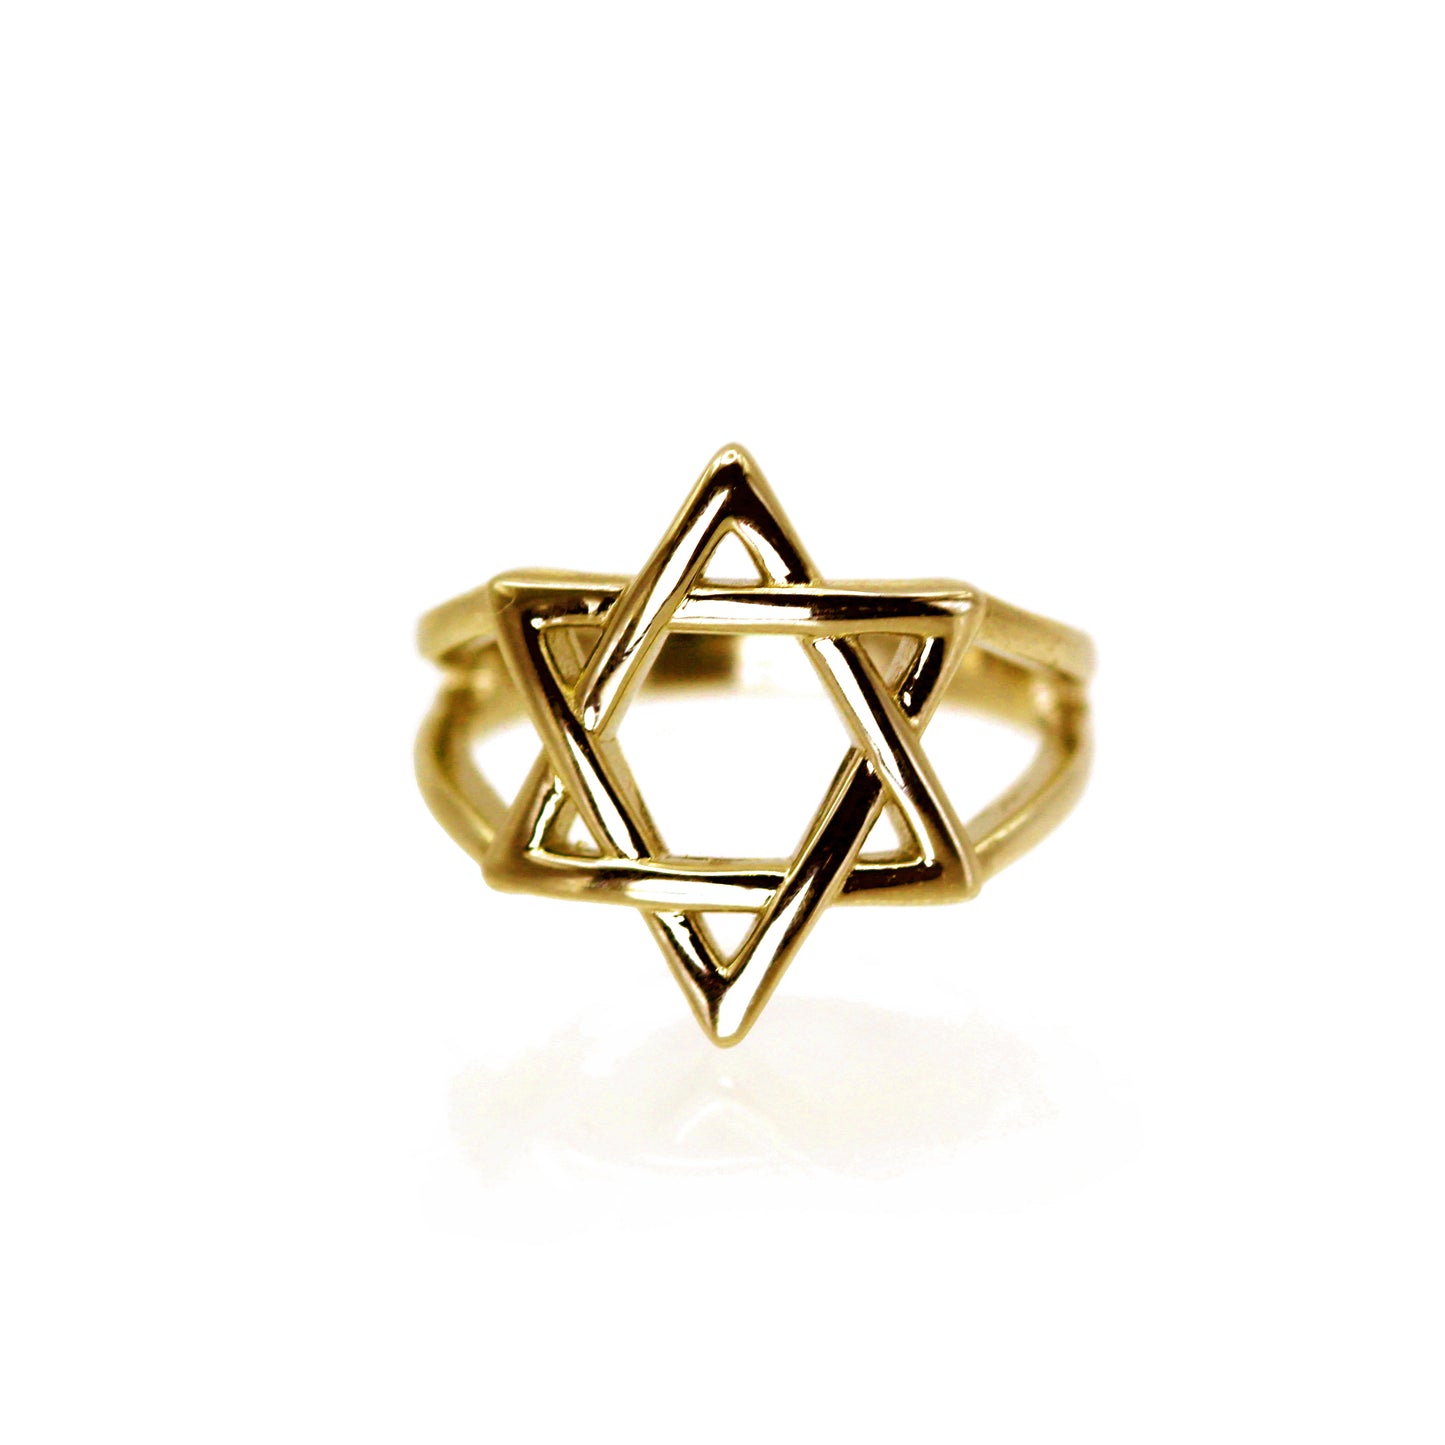 Six pointed Star Ring